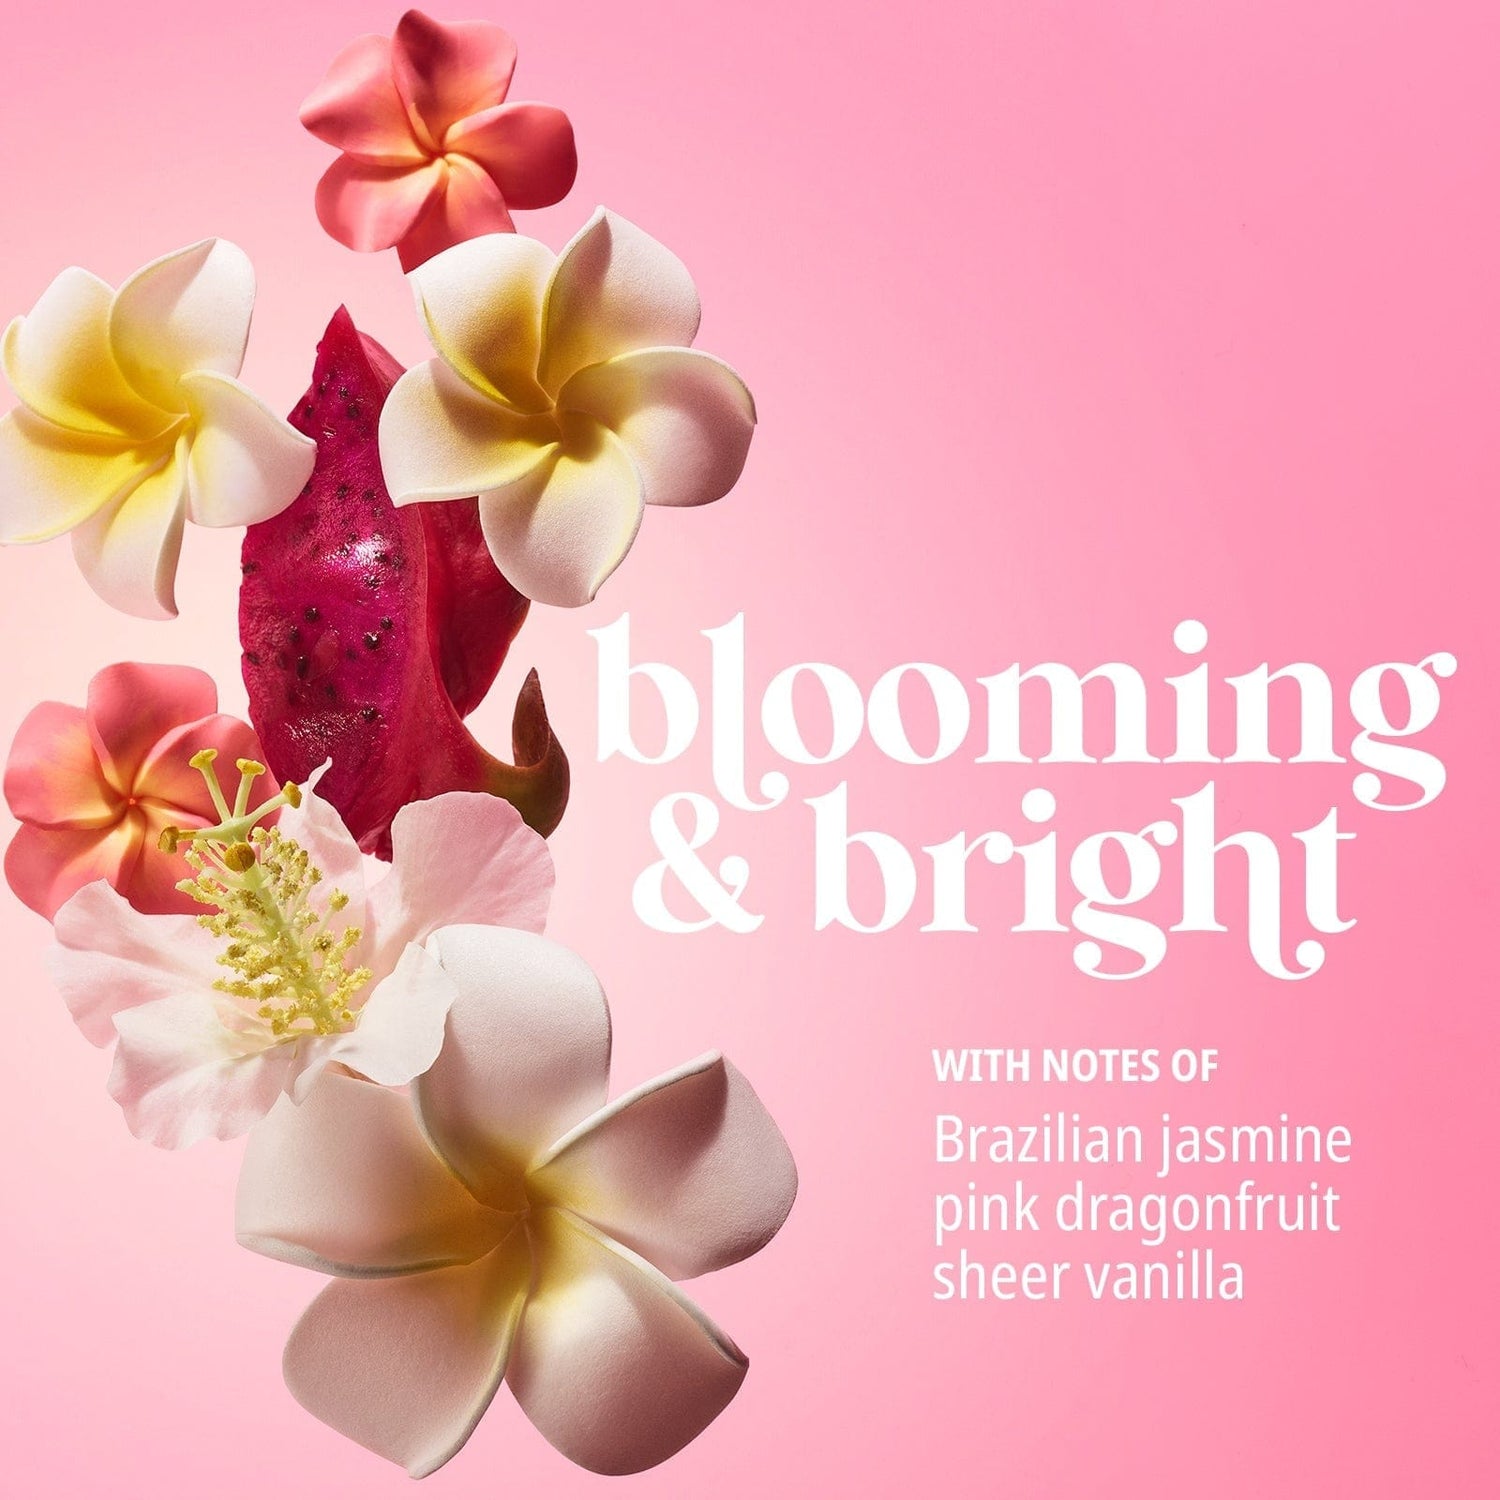 Blooming &amp; bright with notes of Brazilian jasmine, pink dragonfruit, sheer vanilla